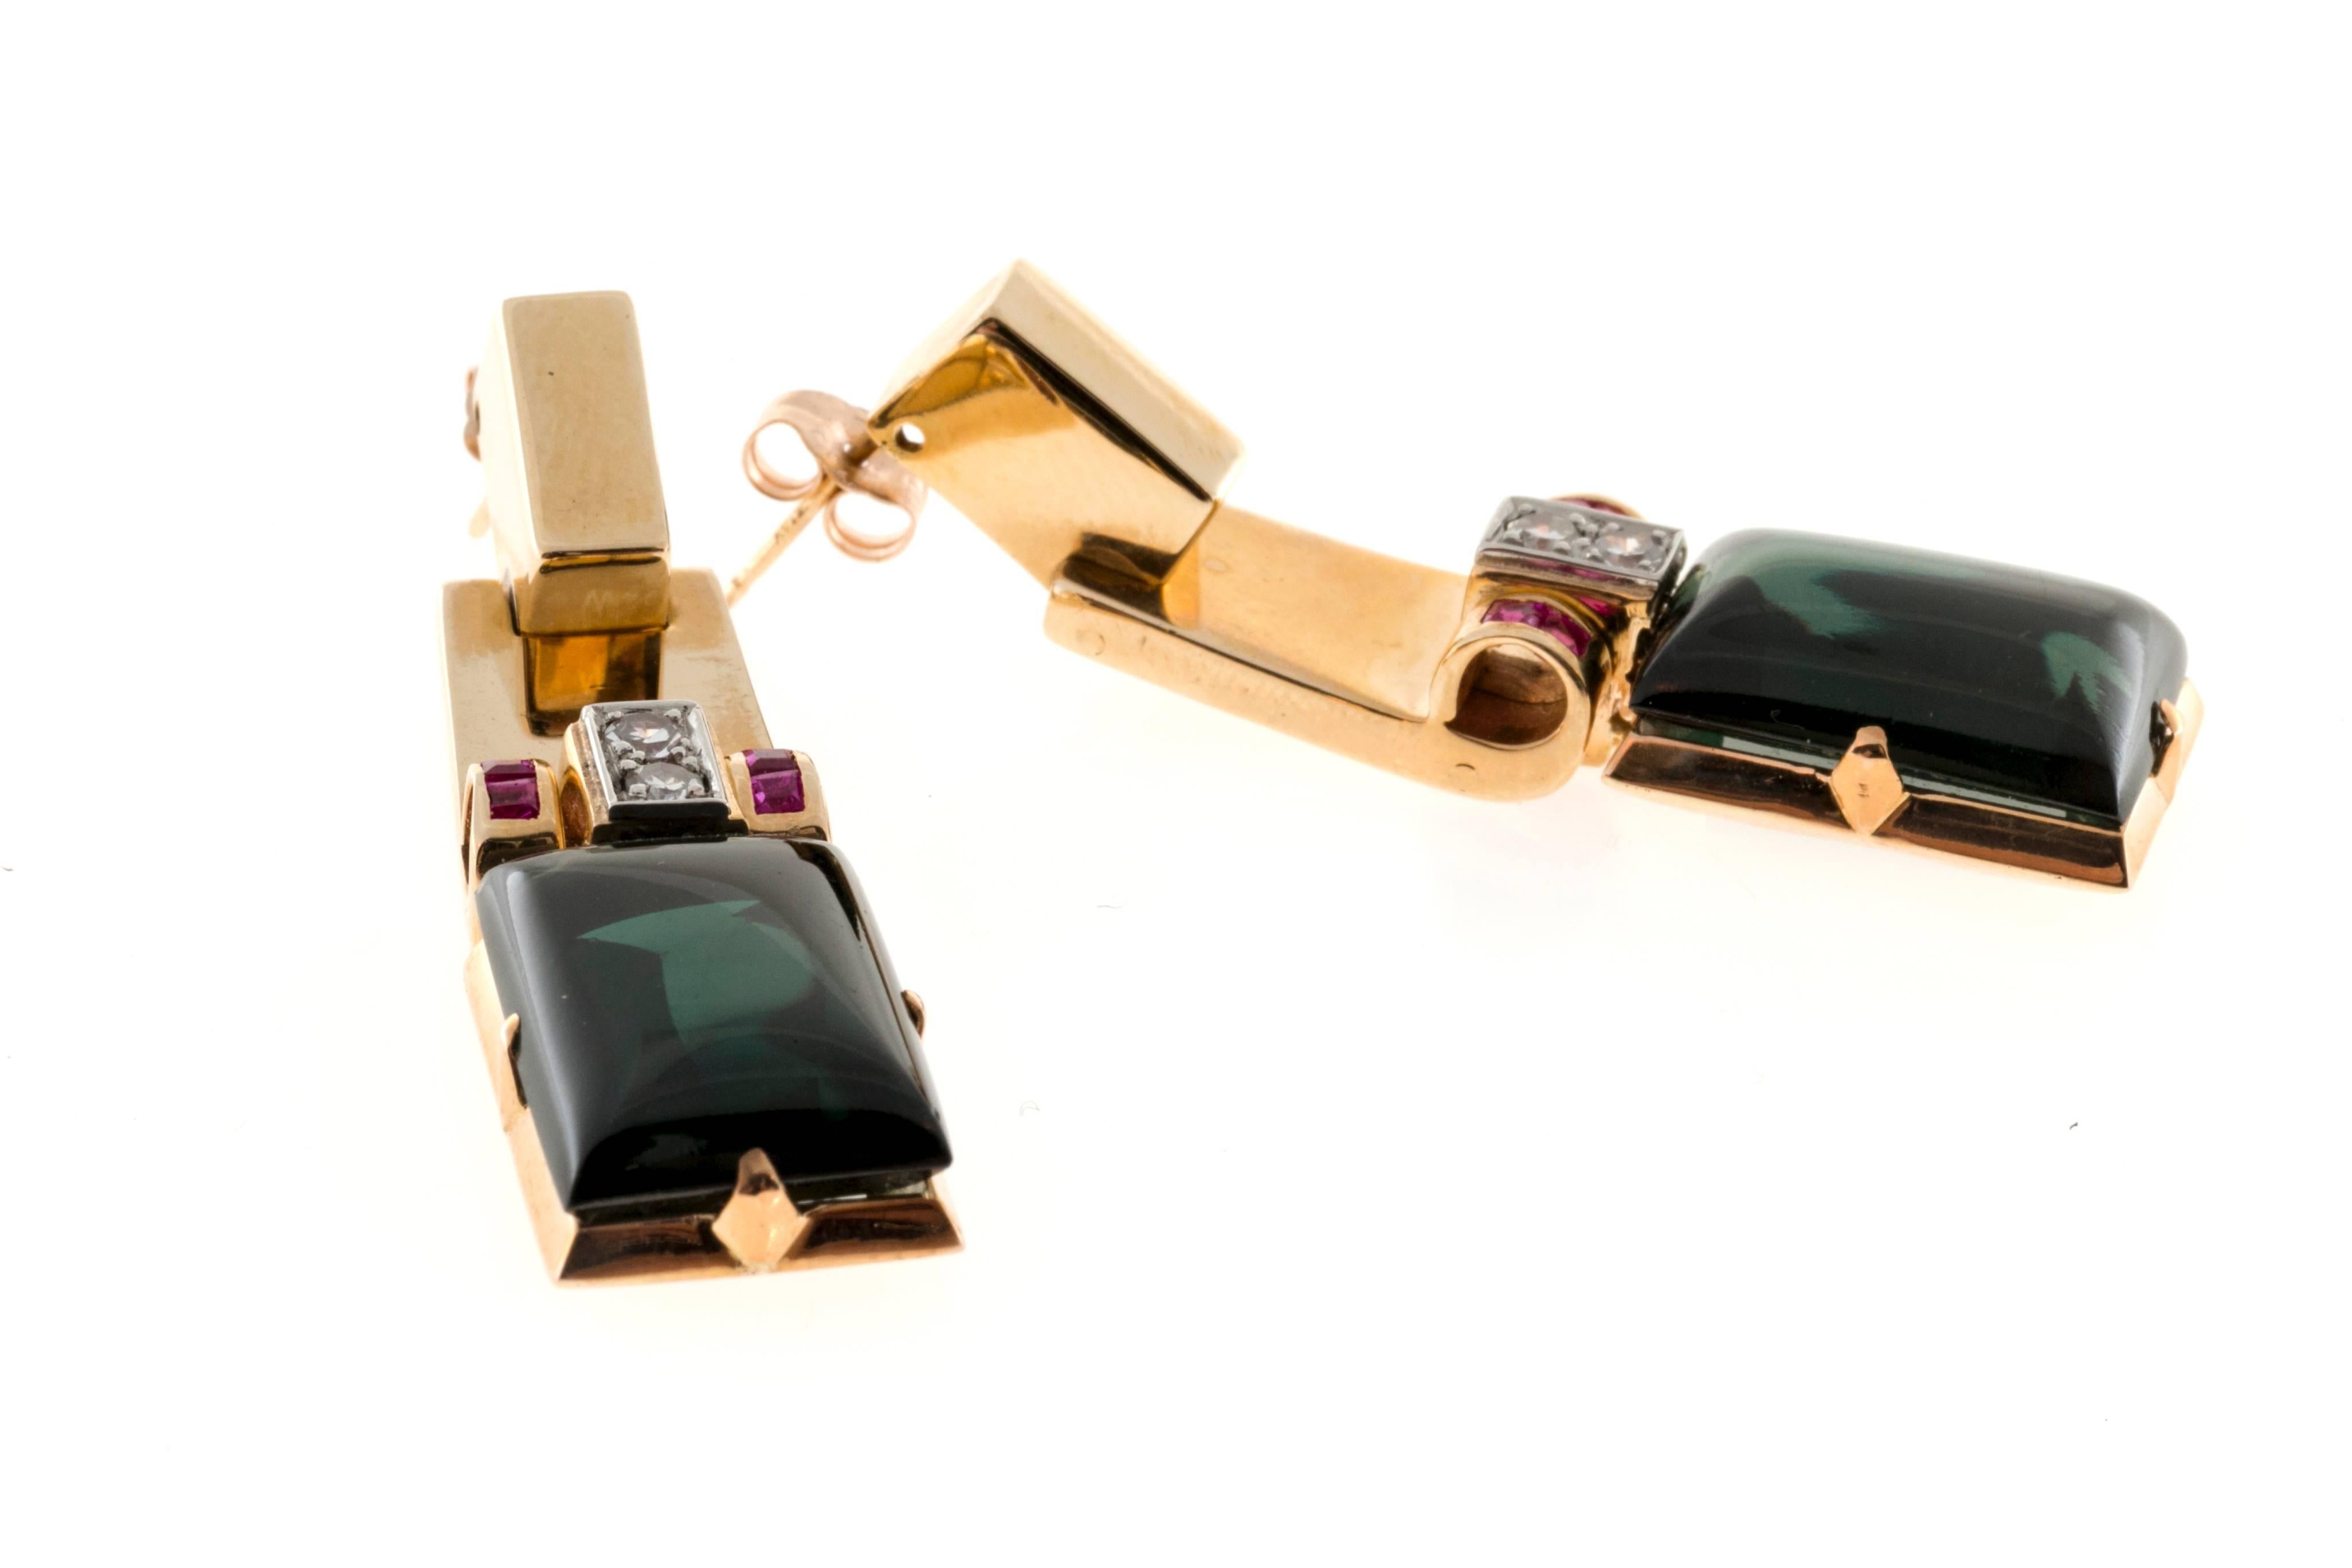 Ruby Diamond and Green Tourmaline set in a rose gold dangle earring.

2 Emerald cut Cabochon cut deep green Tourmaline, approx. total weight 25cts, VS, 16 x 11.2 x 7.5mm
8 bright red square Rubies, approx. total weight .40cts, VS
4 single cut